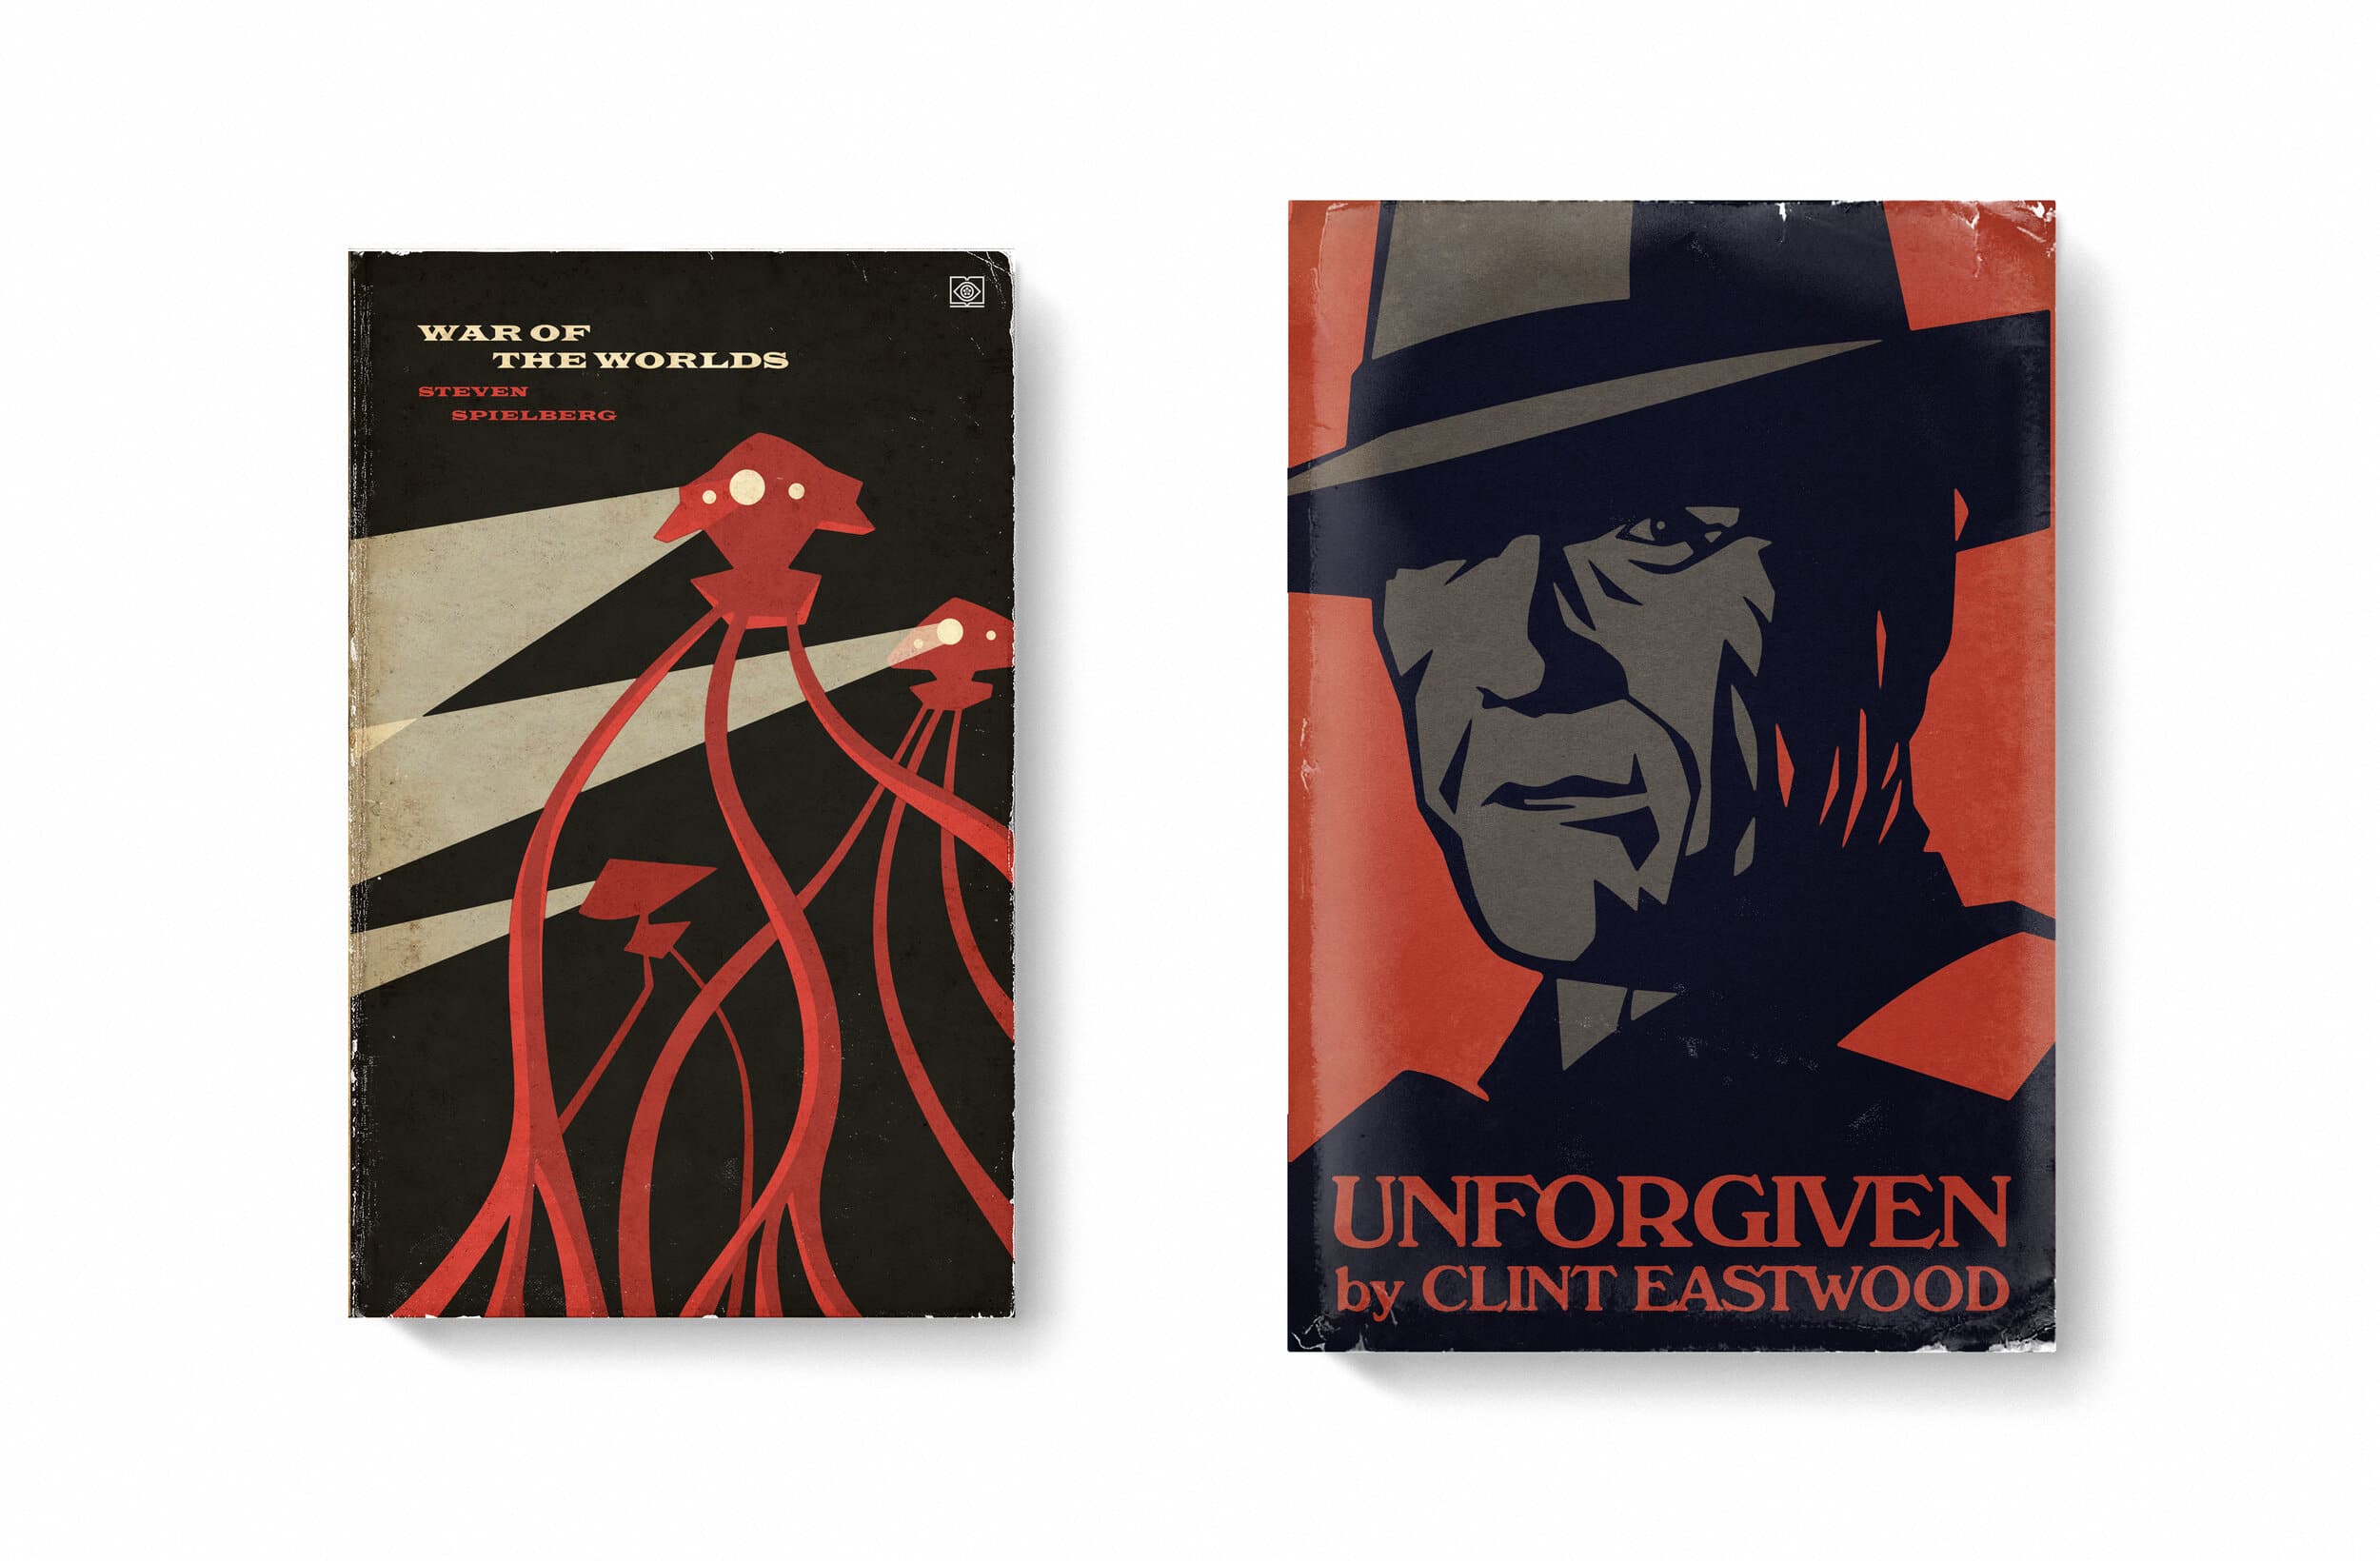 Decorate Your Bachelor Pad With Good Movies As Old Books Prints